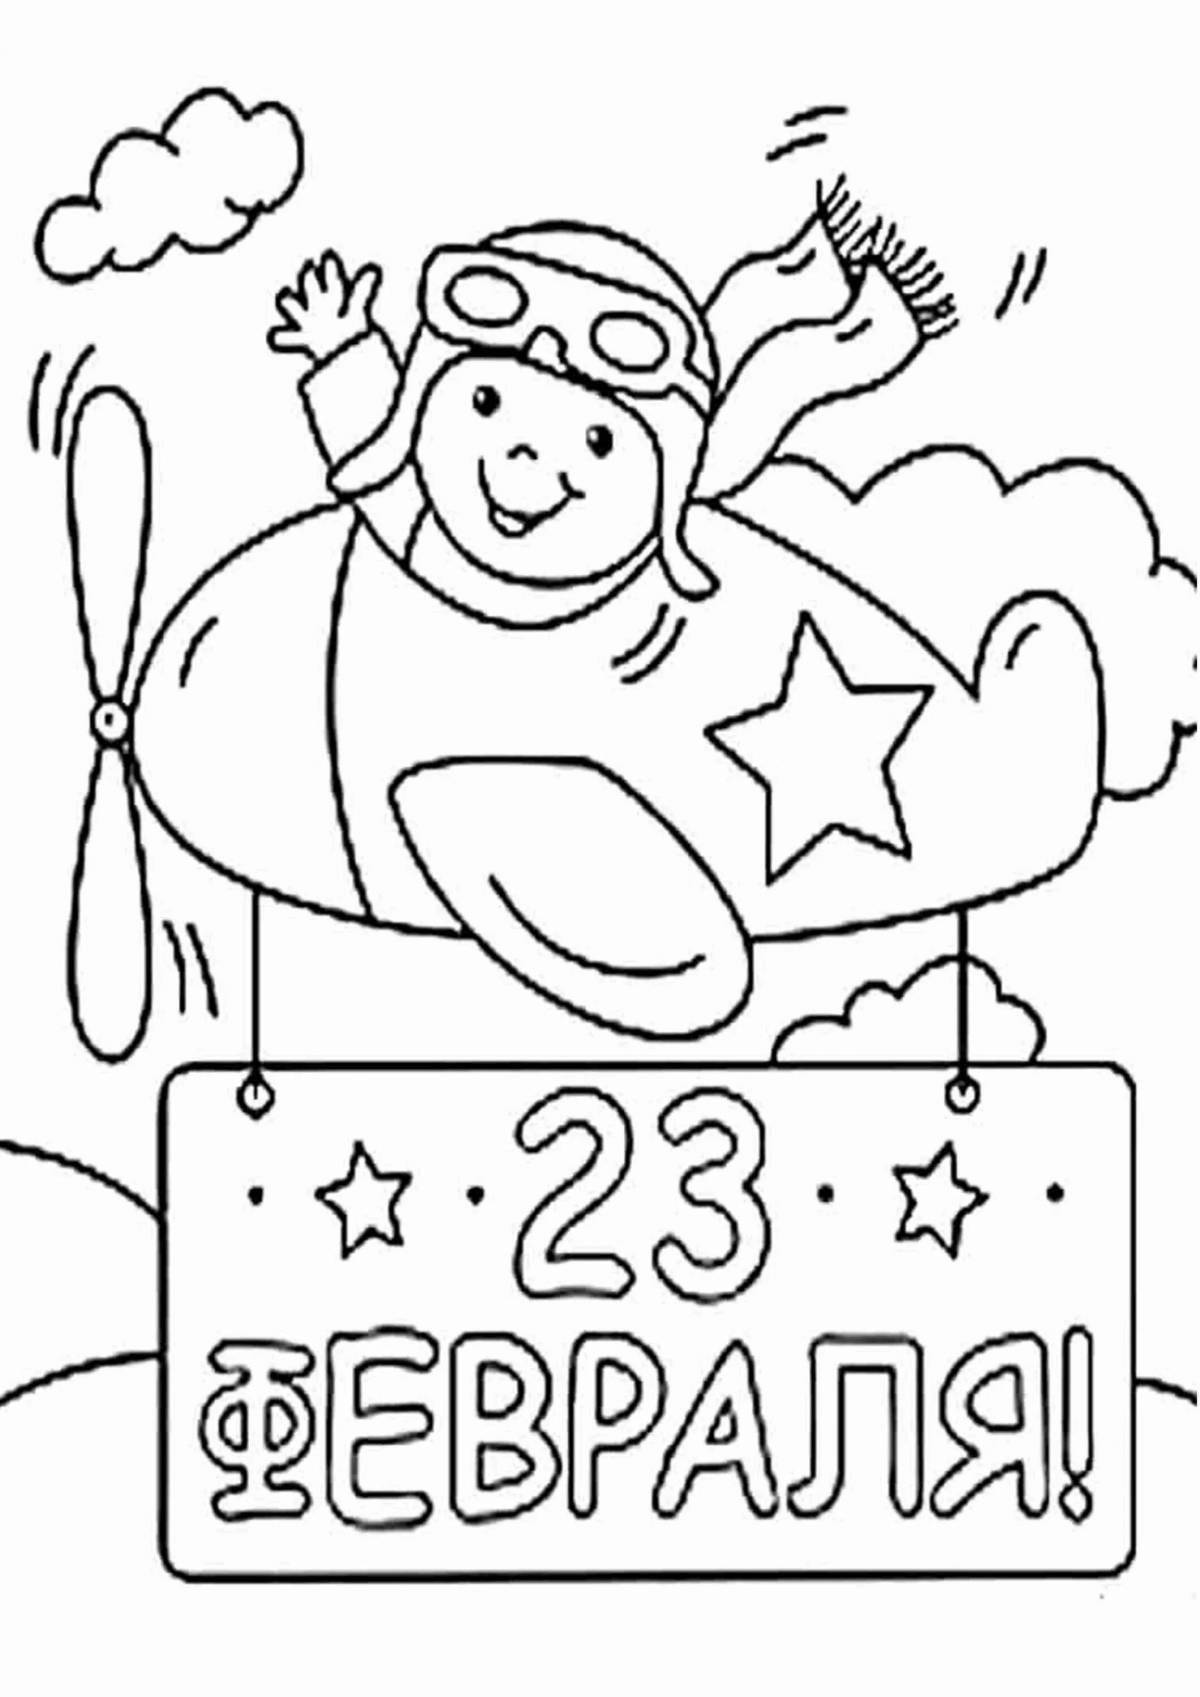 Adorable coloring frame February 23